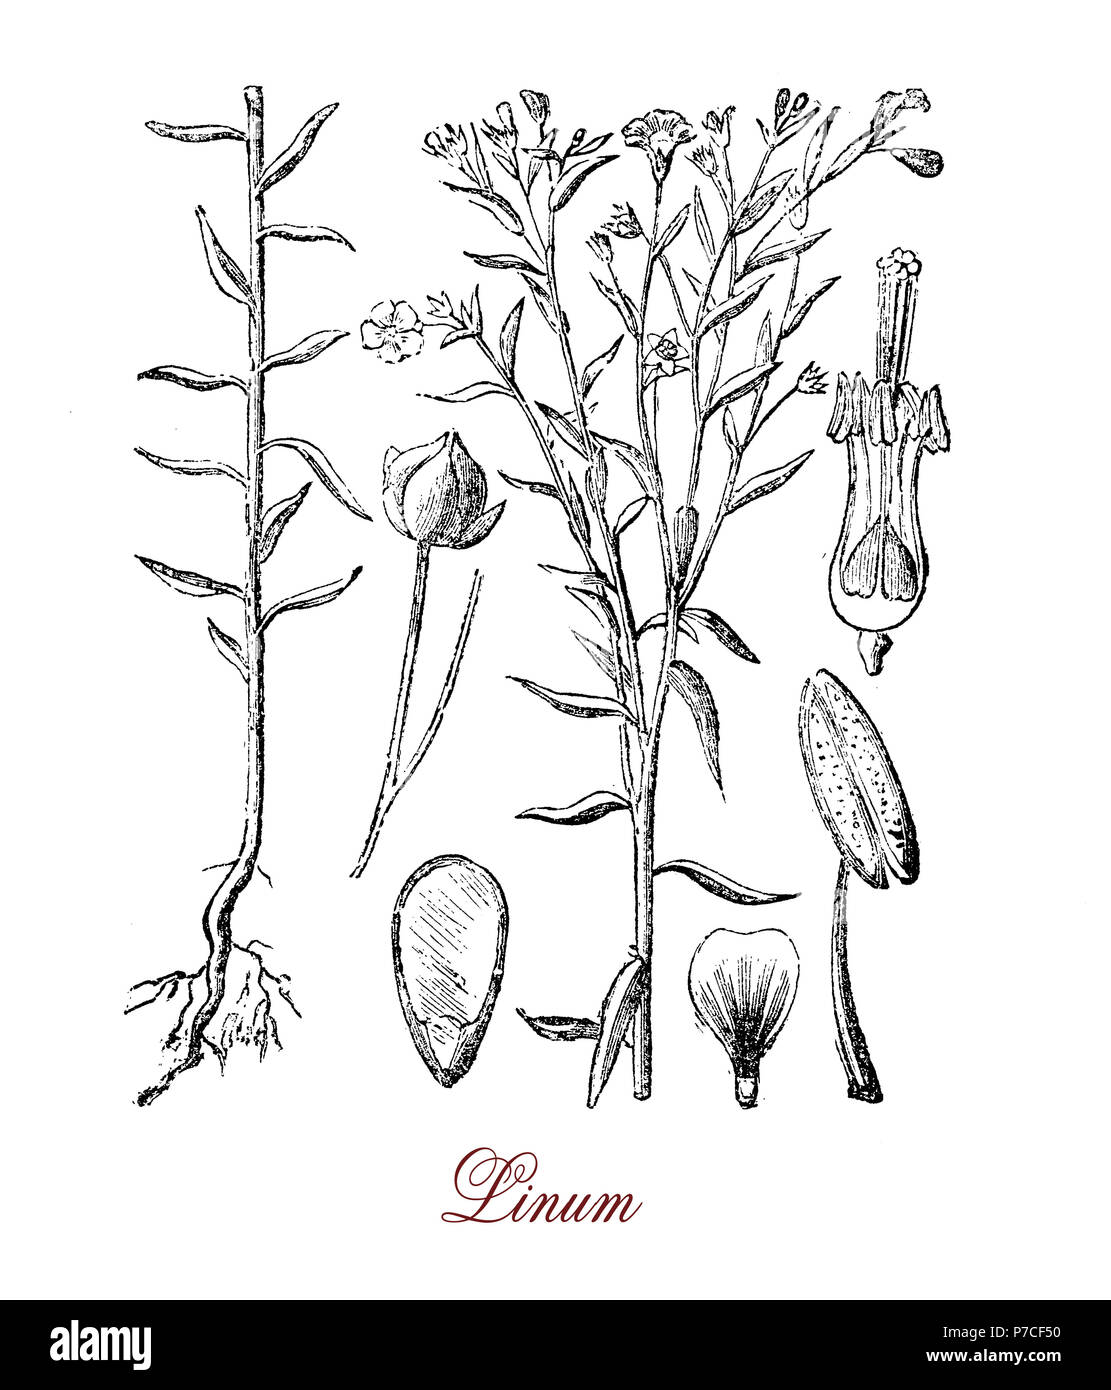 Vintage botanical engraving of common flax or linseed,cultivated food and fiber crop with pale blue flowers The most known products are edible linseed oil and linen, textile used for bedsheets and clothes. Stock Photo